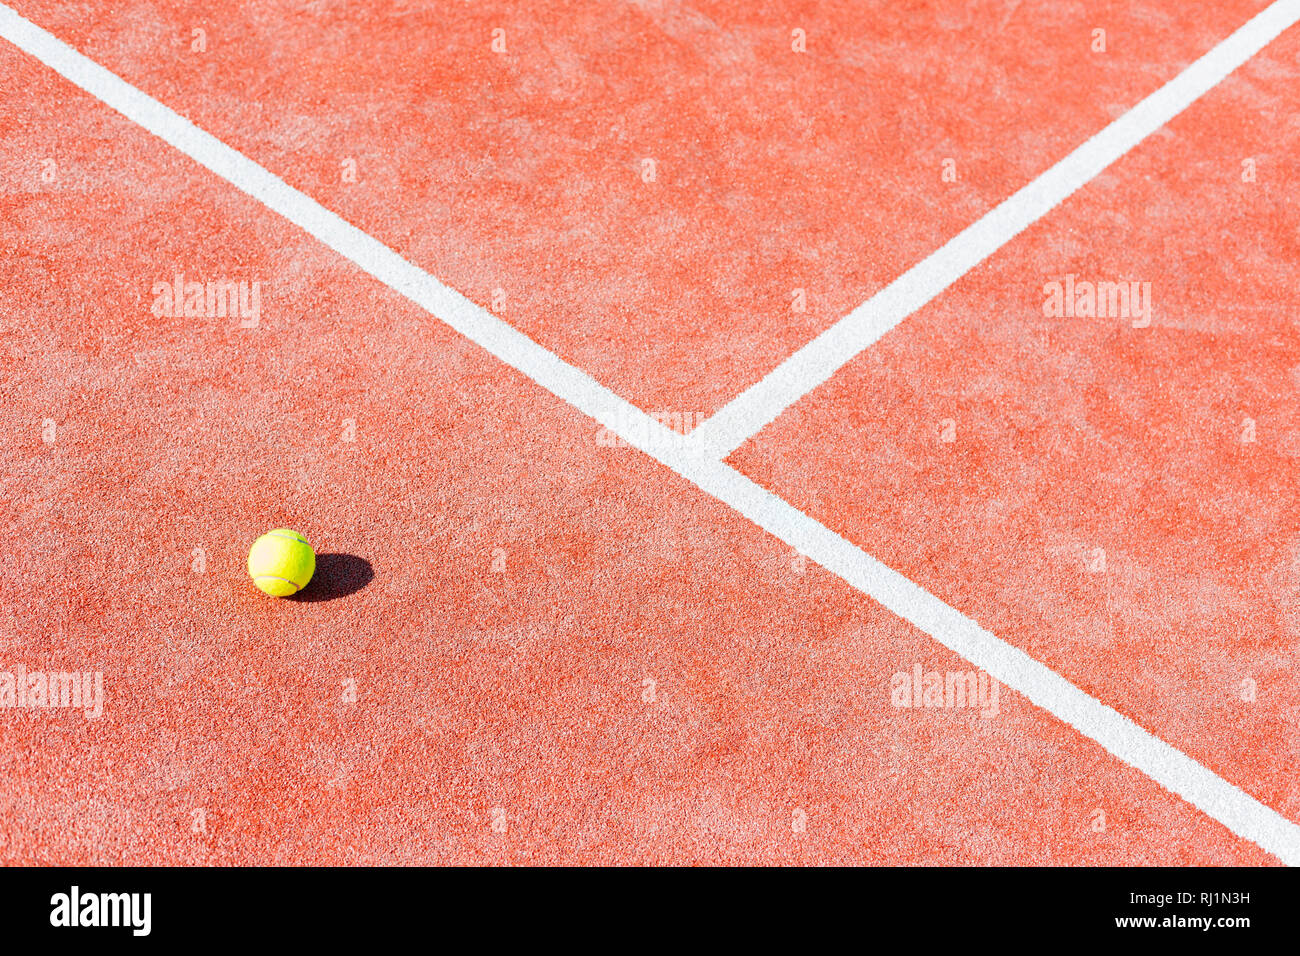 High angle view of tennis ball on red court during sunny day Stock Photo